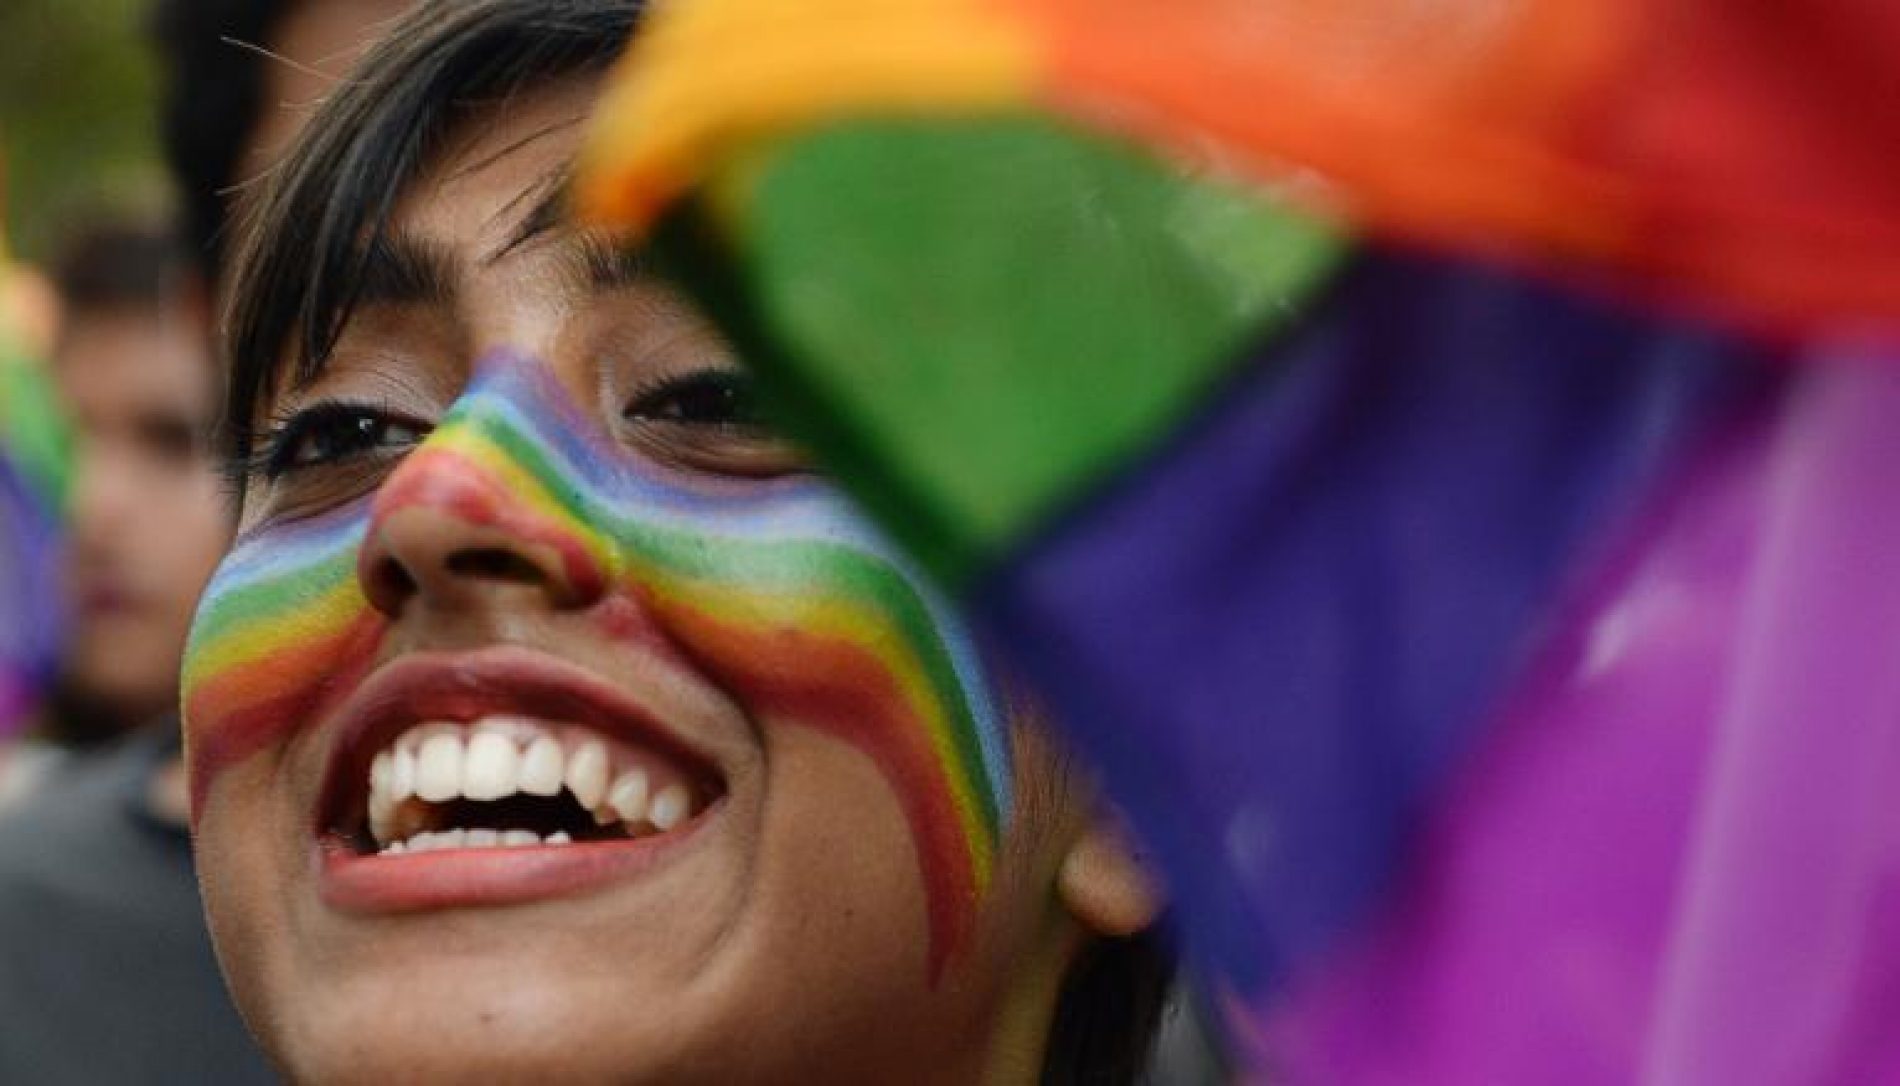 India’s top court decriminalizes gay sex, overturning more than 150 years of anti-LGBT legislation